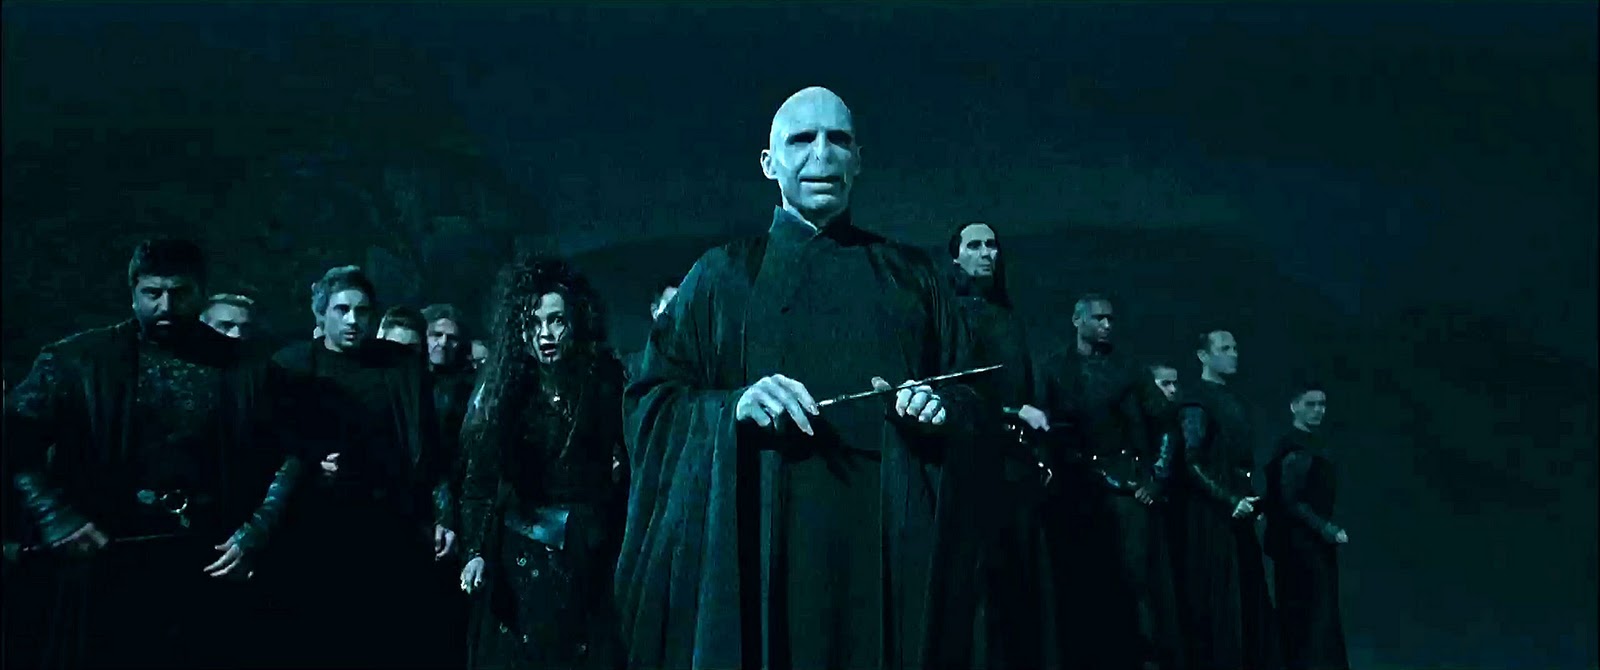  Bellatrix and Voldemort with Death Eaters